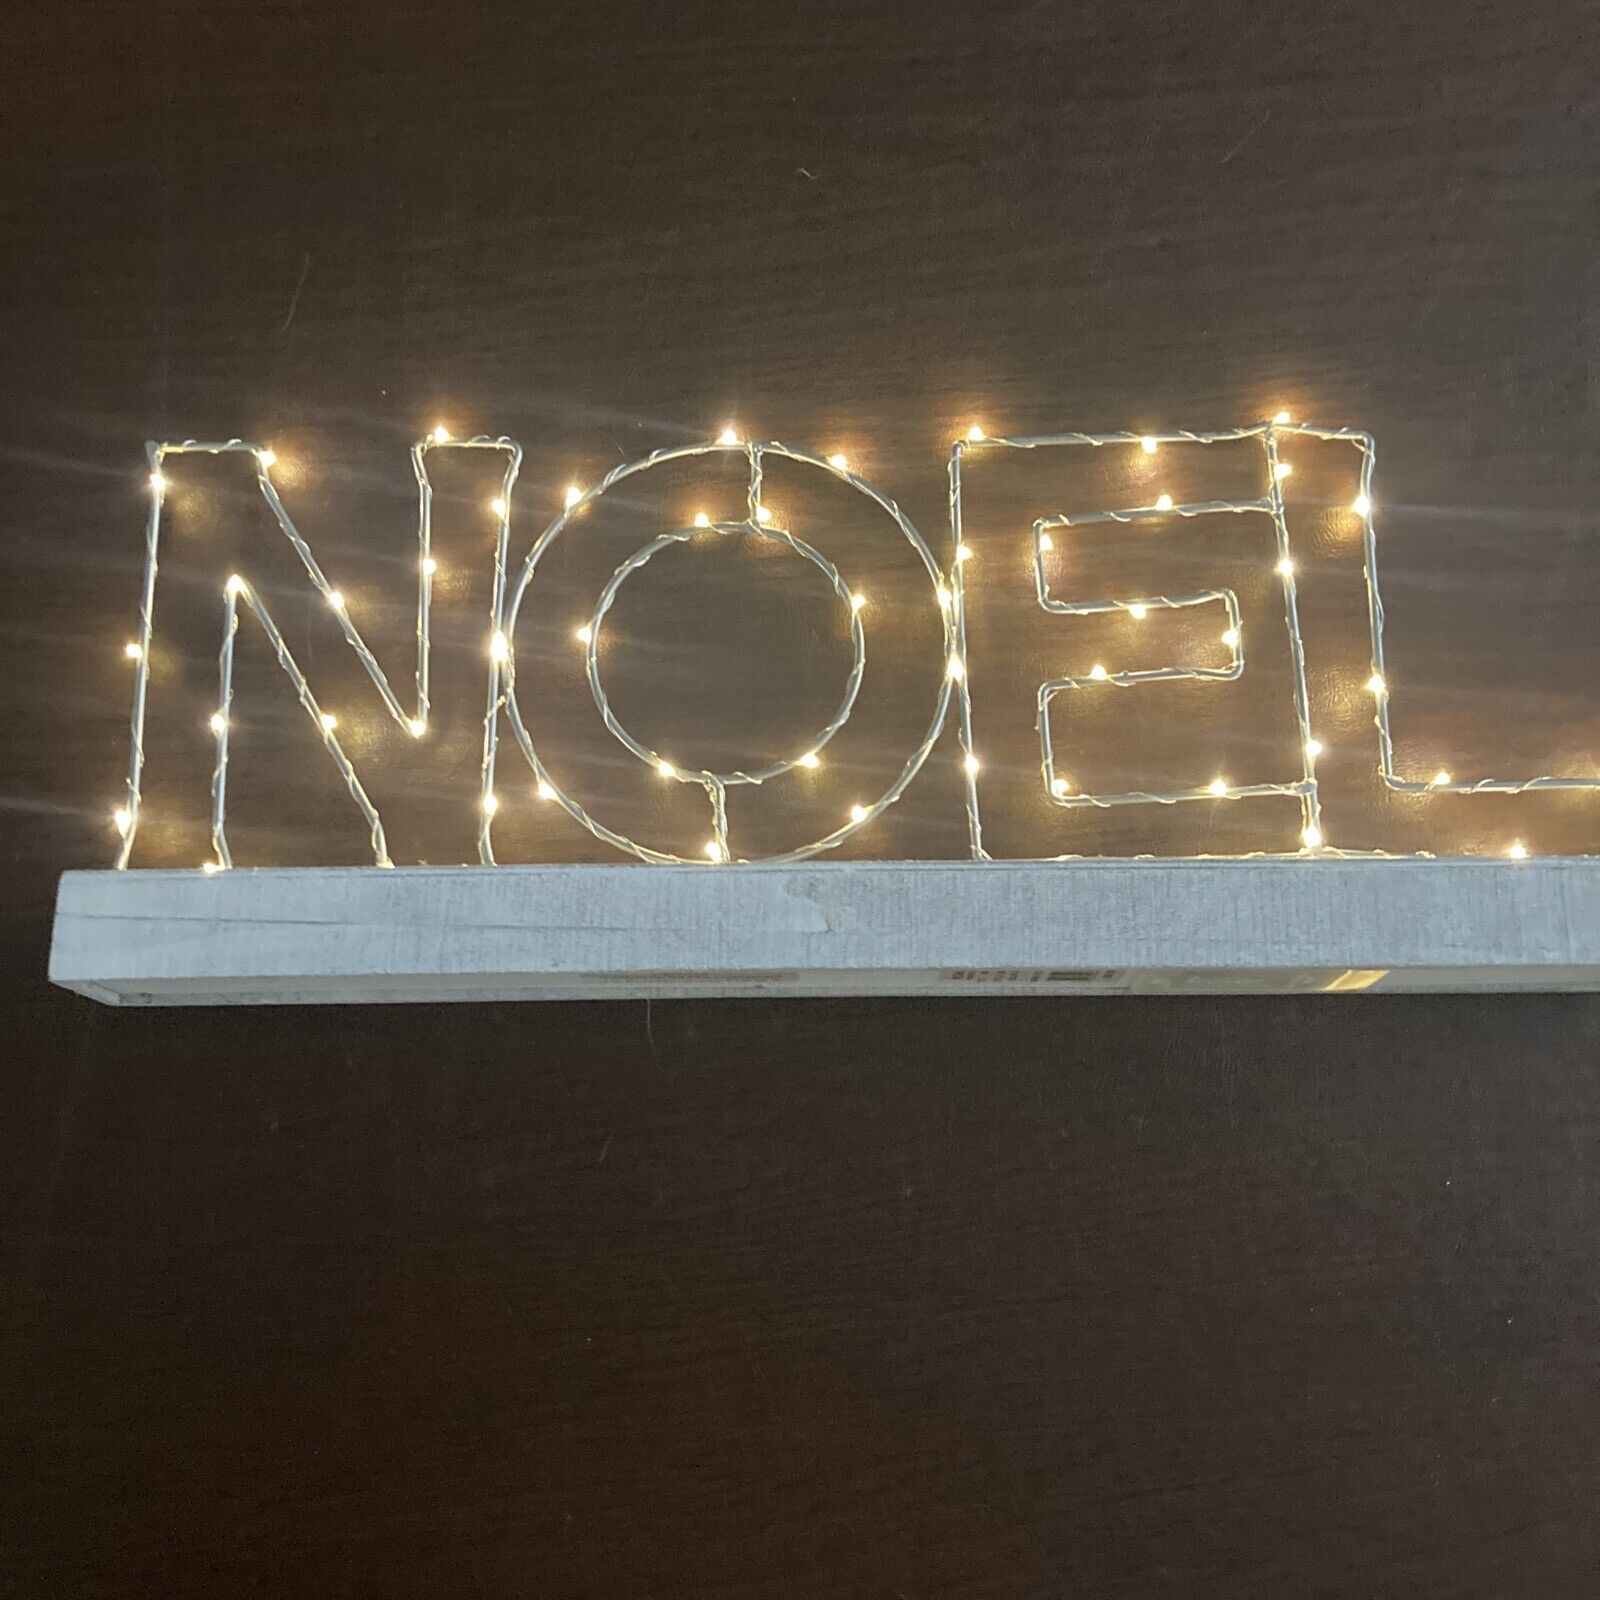 Christmas NOEL Metal Lighted Sign Free Standing Farmhouse Decor 20